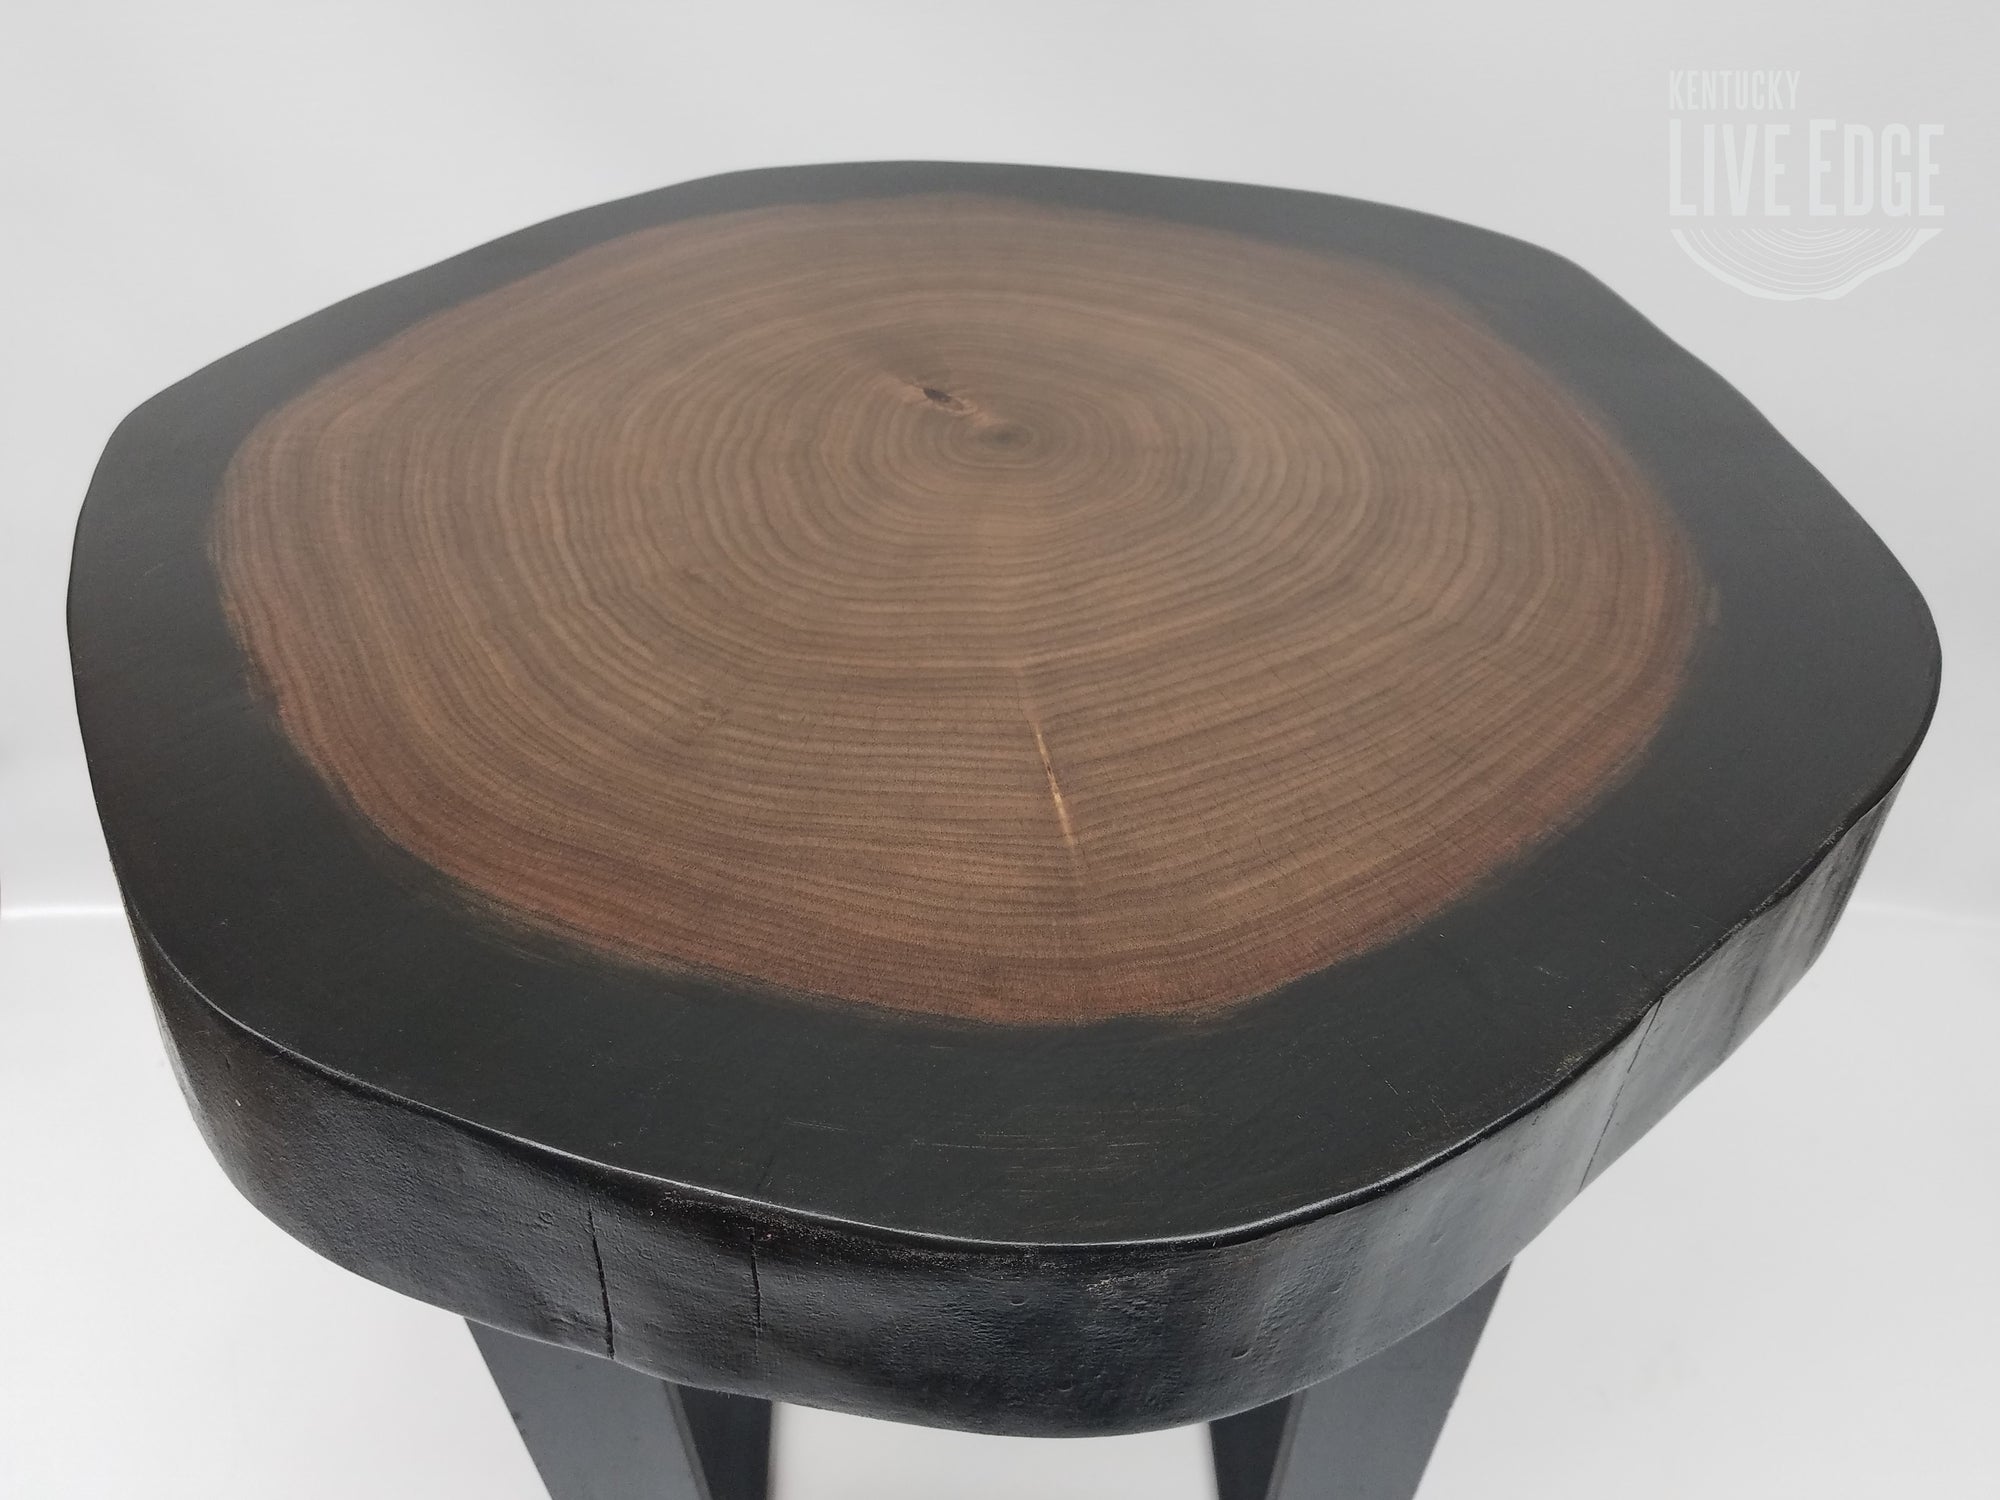 Round Coffee Table- Side Table- Live Edge- Cookie- Black and Brown- Solid Wood Table- Minimalist- Handmade- Wood and Steel- Modern Table